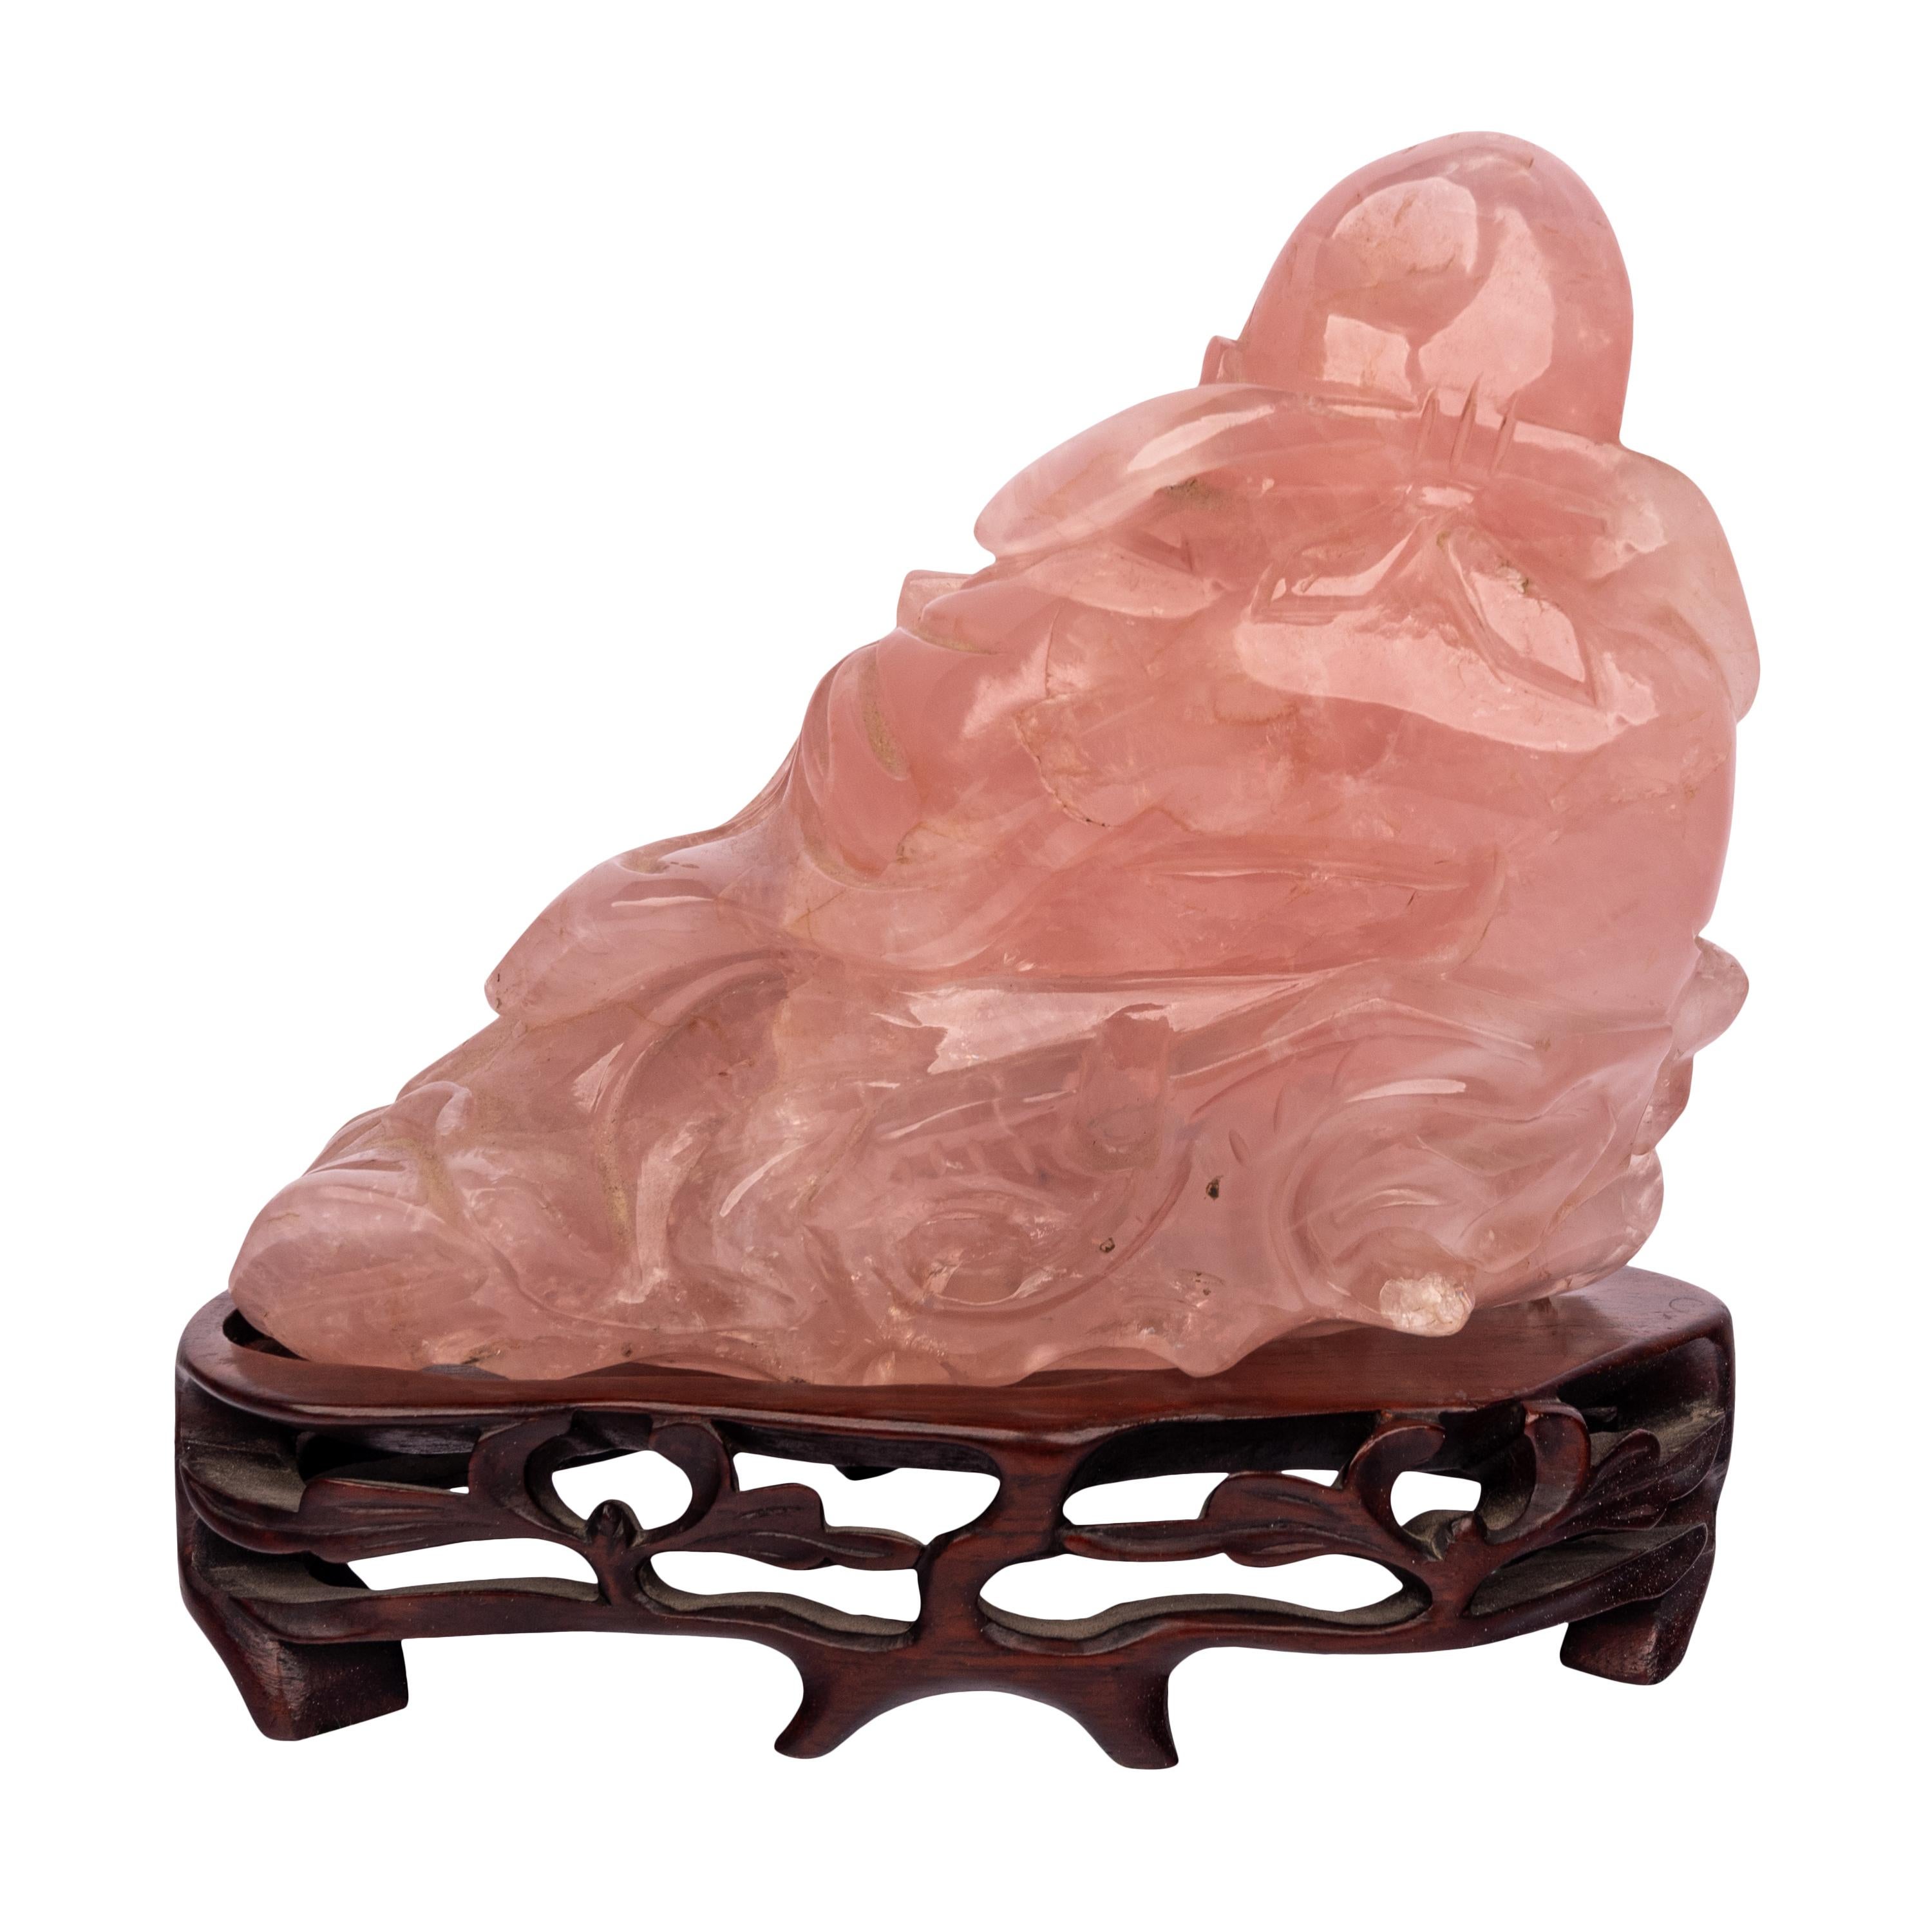 20th Century Antique Chinese Qing Dynasty Carved Rose Quartz Hotei Buddha Statue & Stand 1910 For Sale